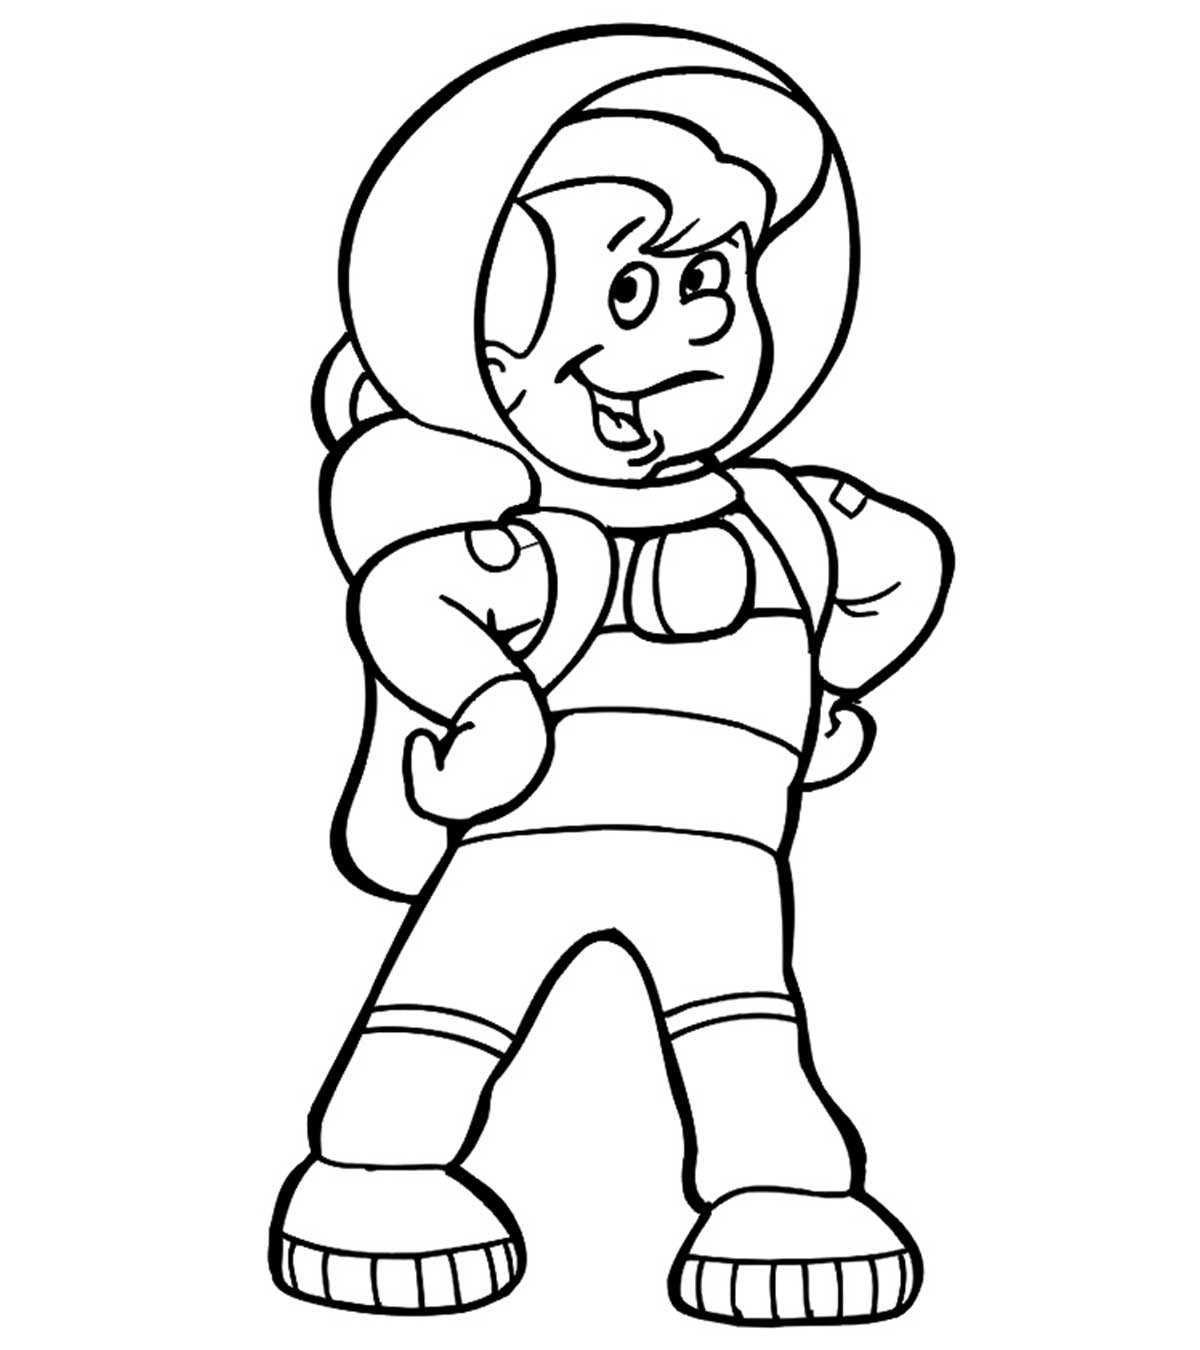 10 Adventurous Astronaut Coloring Pages Your Toddler Will Love_image